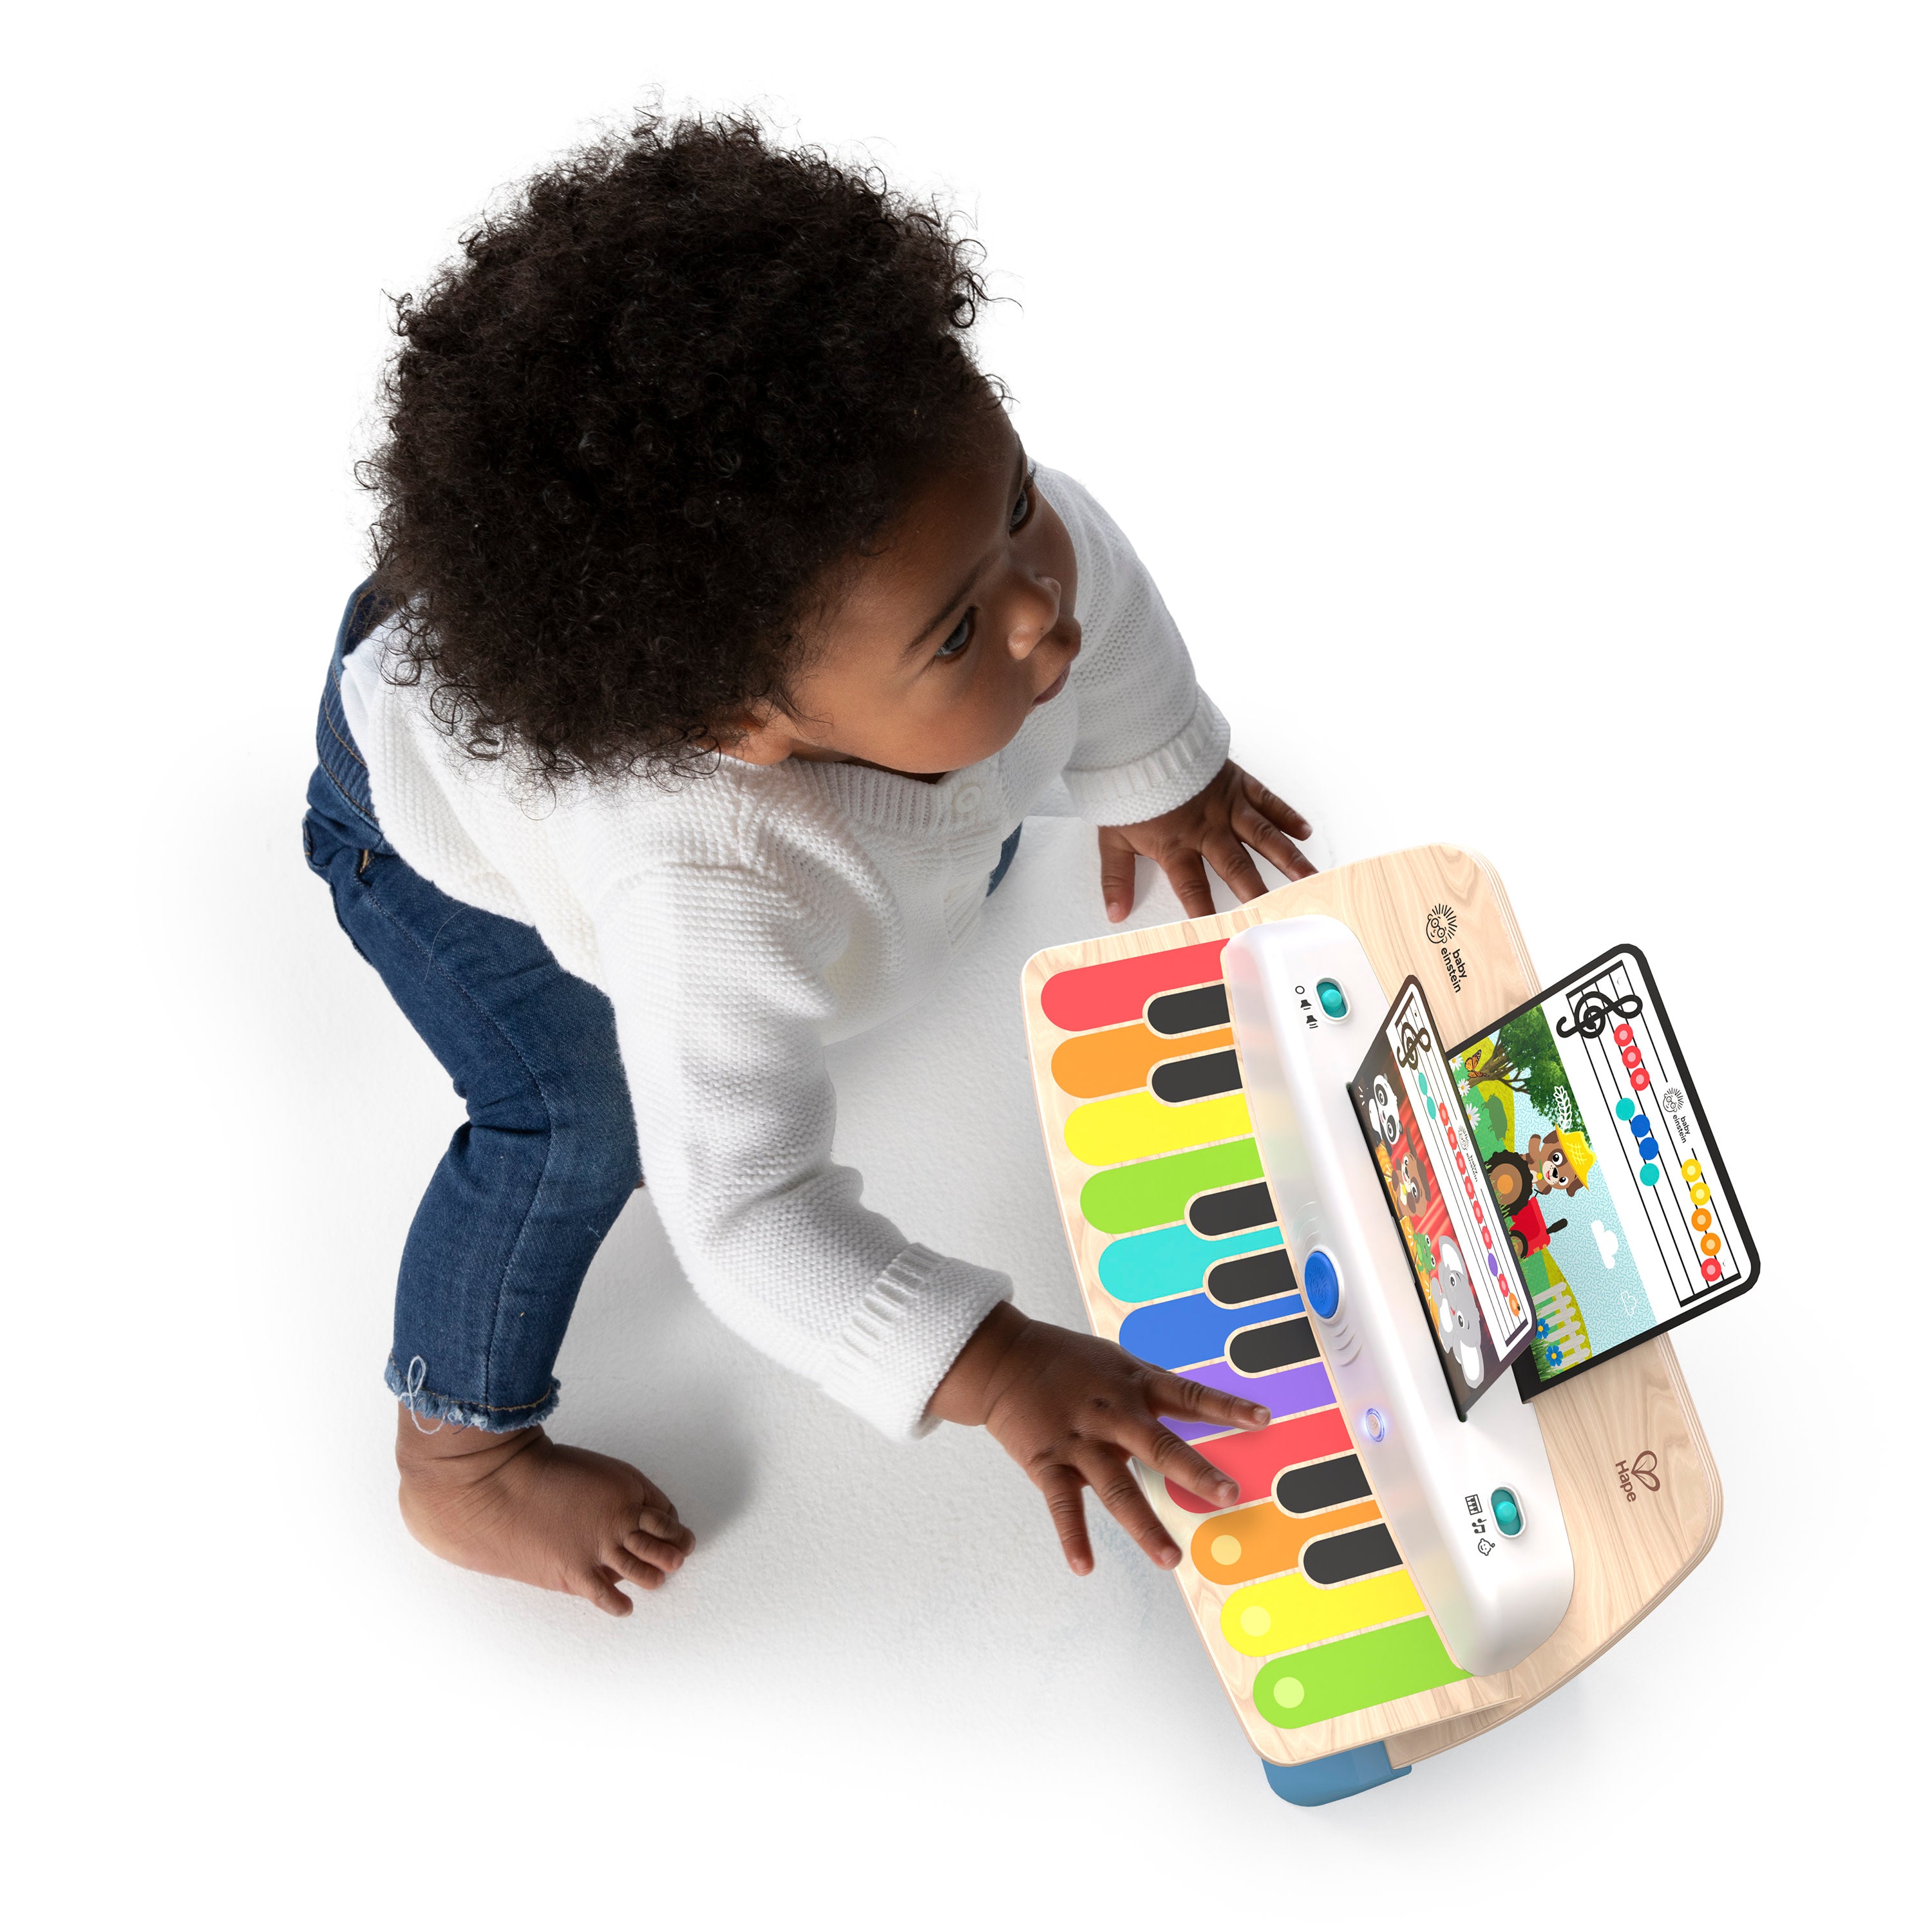 Baby Einstein Wooden Piano by Hape Magic Touch Piano